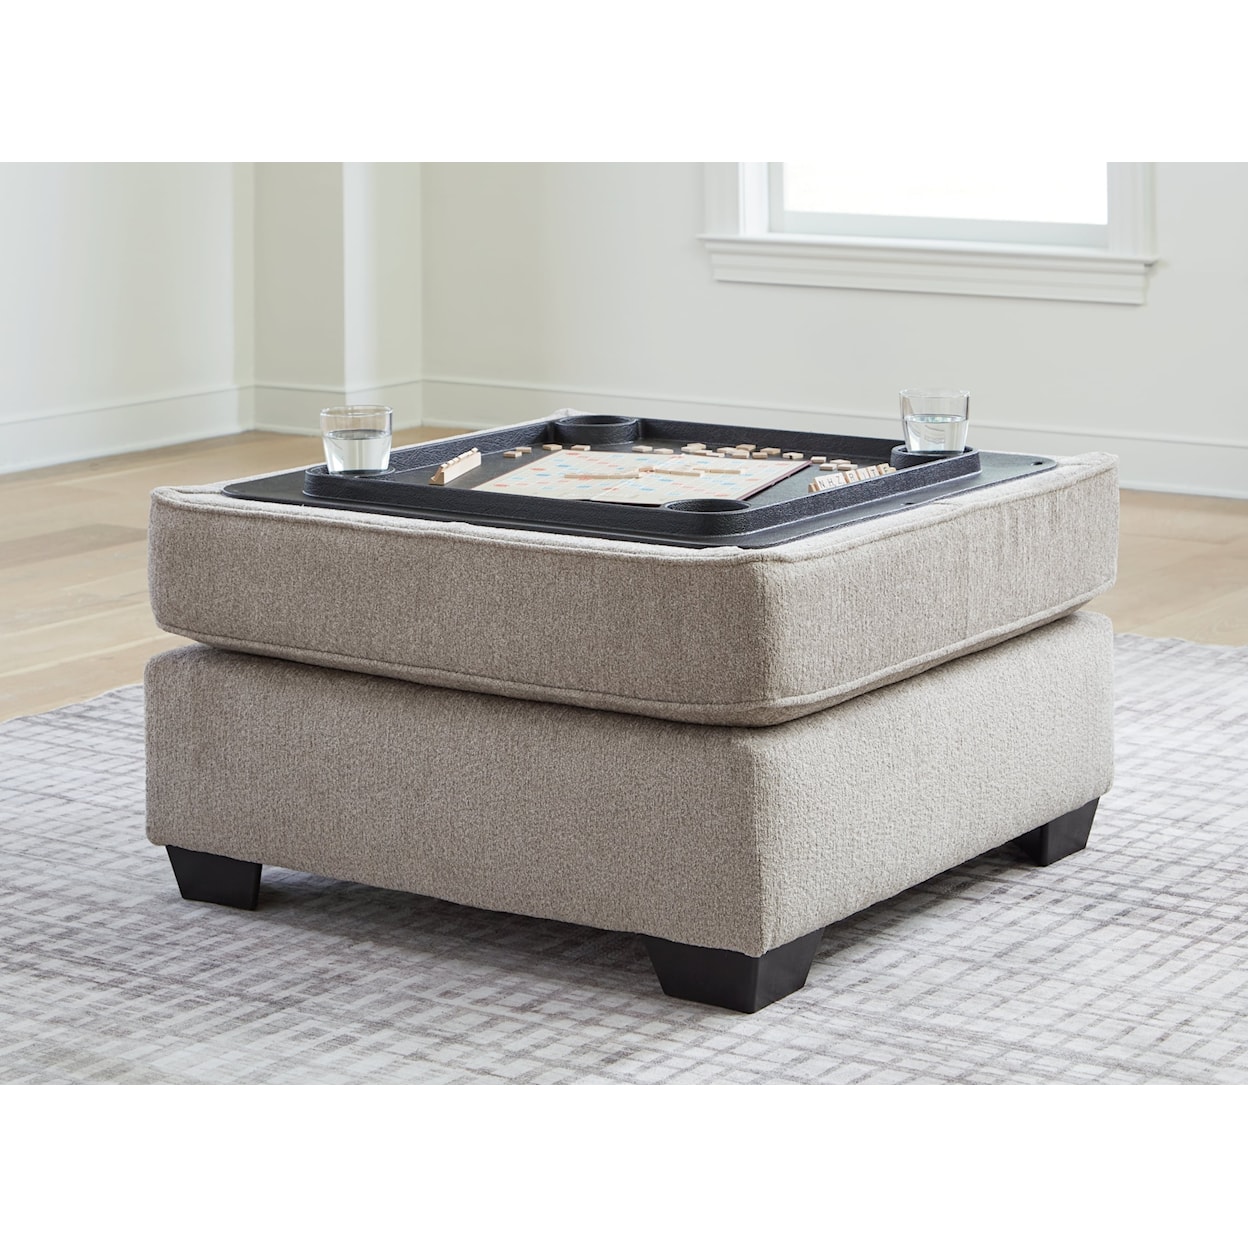 Signature Design by Ashley Claireah Ottoman With Storage